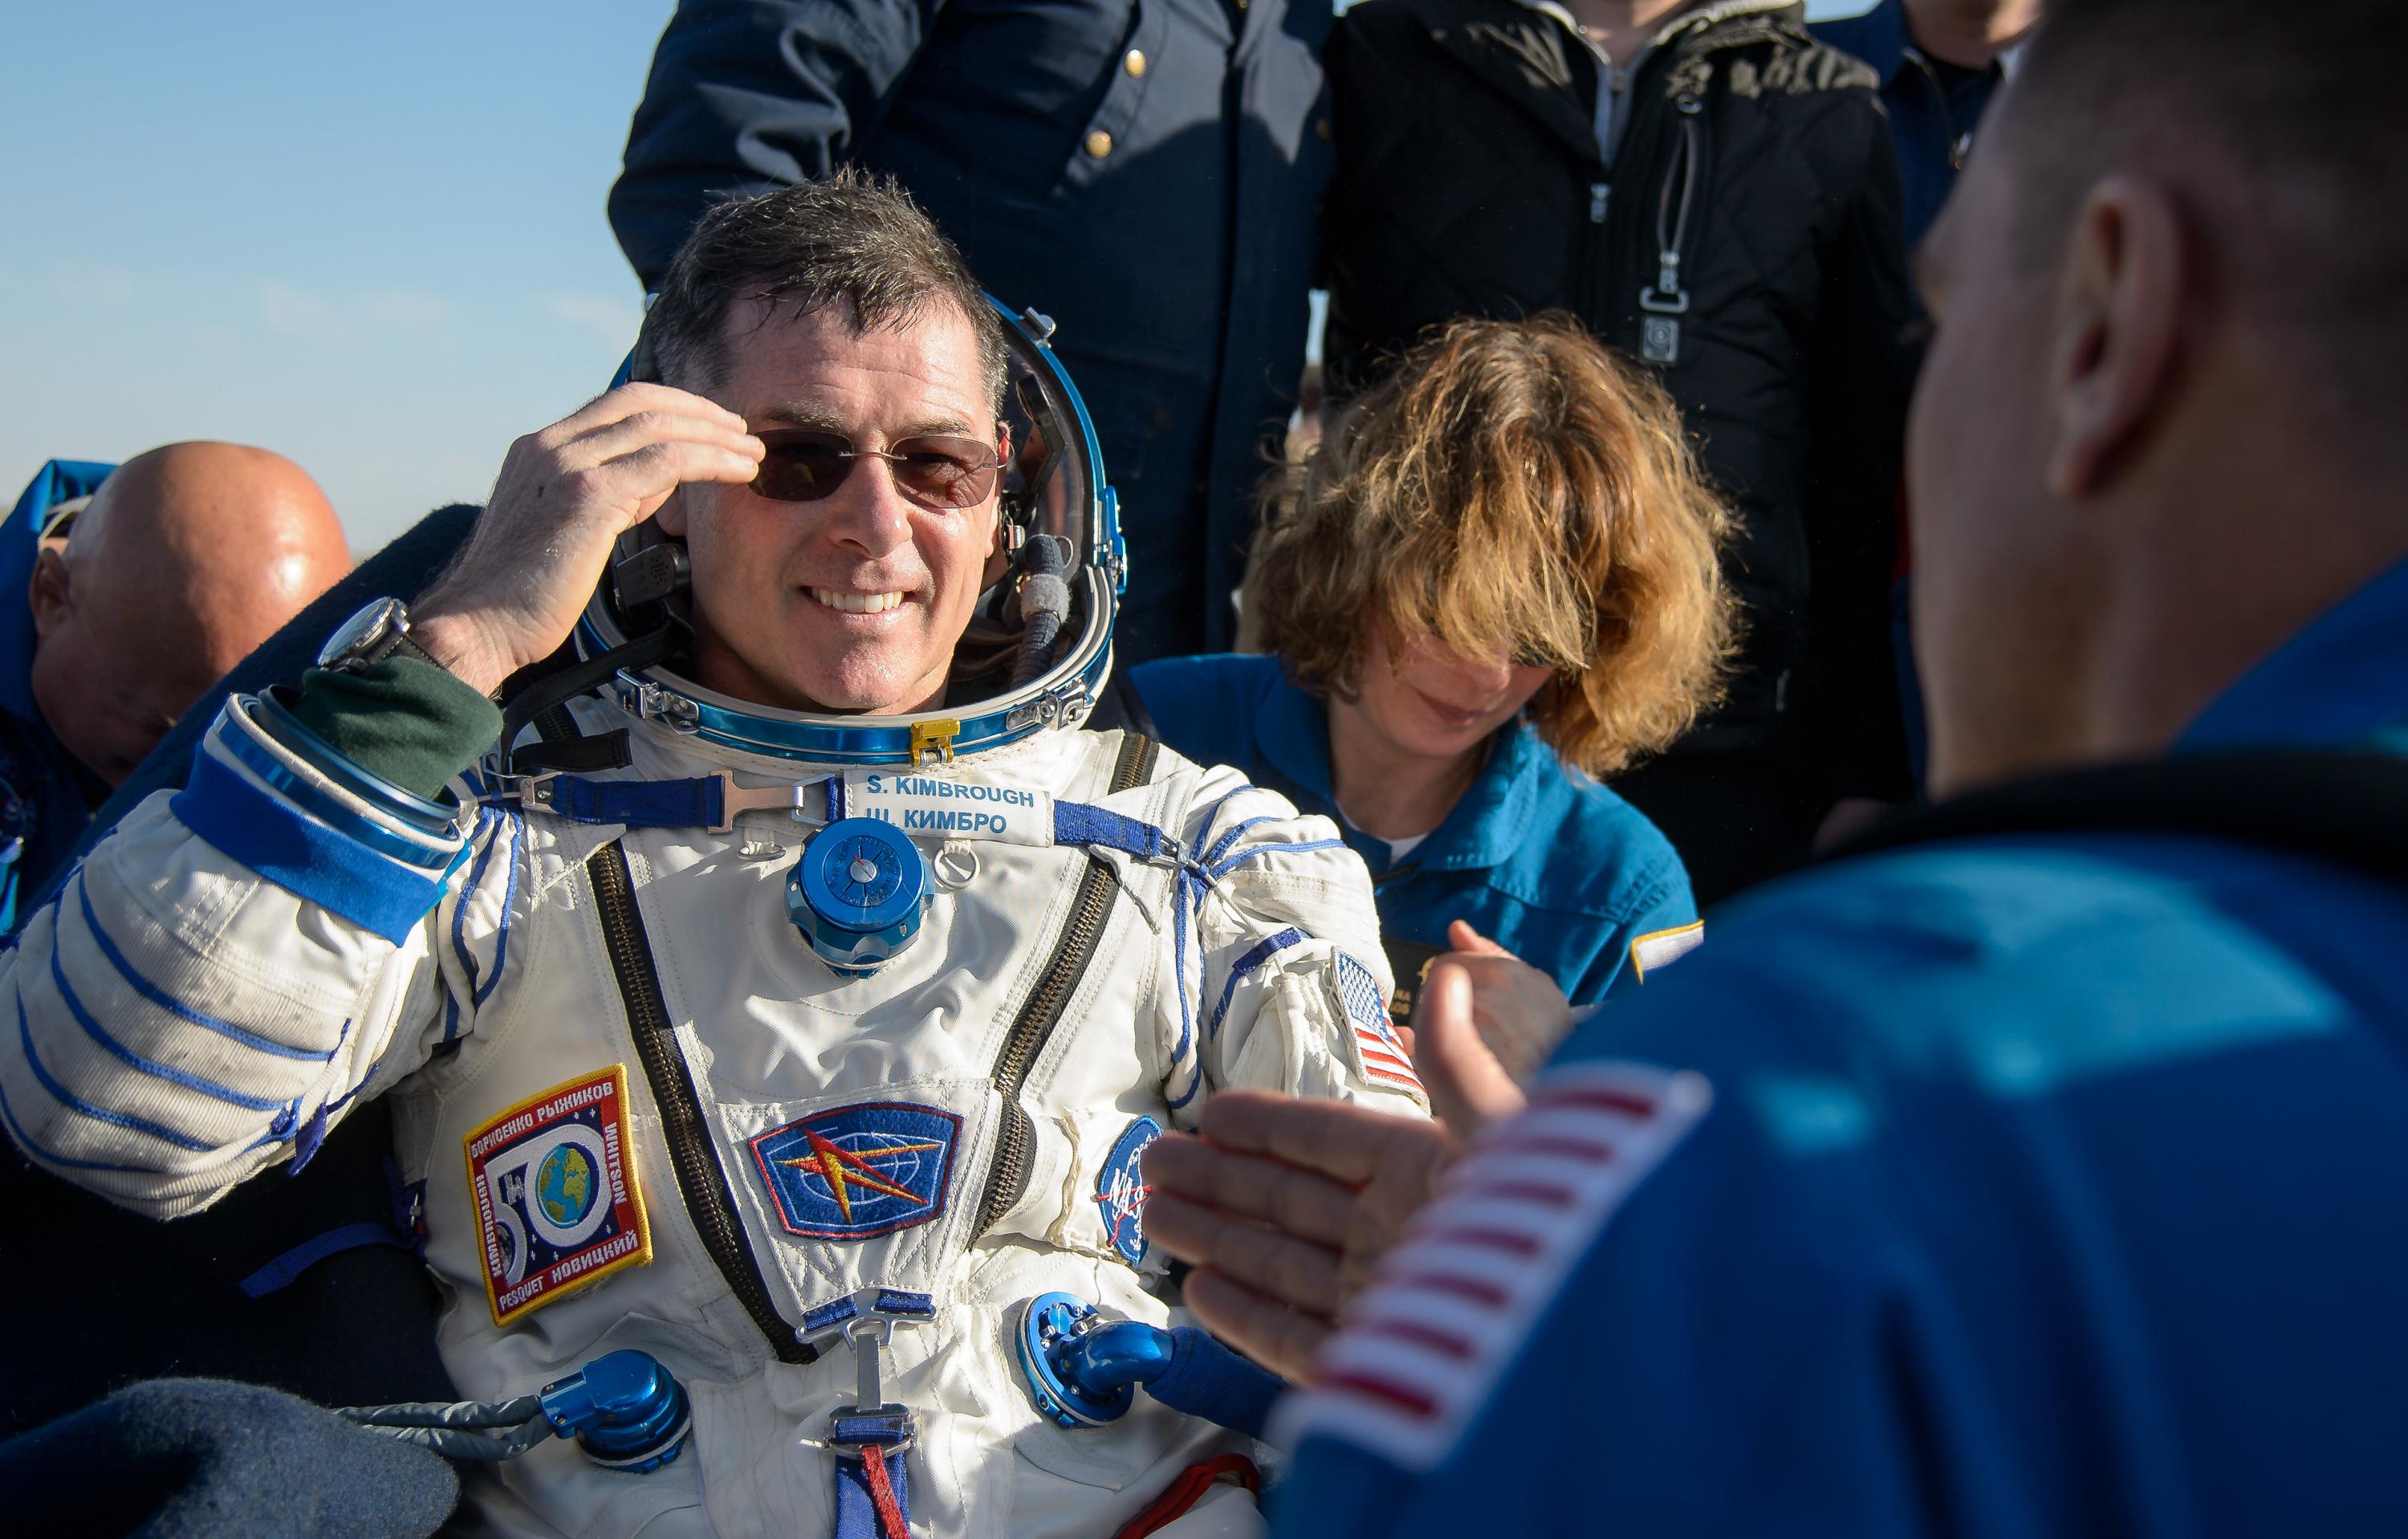 Shane Kimbrough, minutes after landing in Kazakhstan after nearly six months in space. Photo taken by NASA on April 10, 2017.